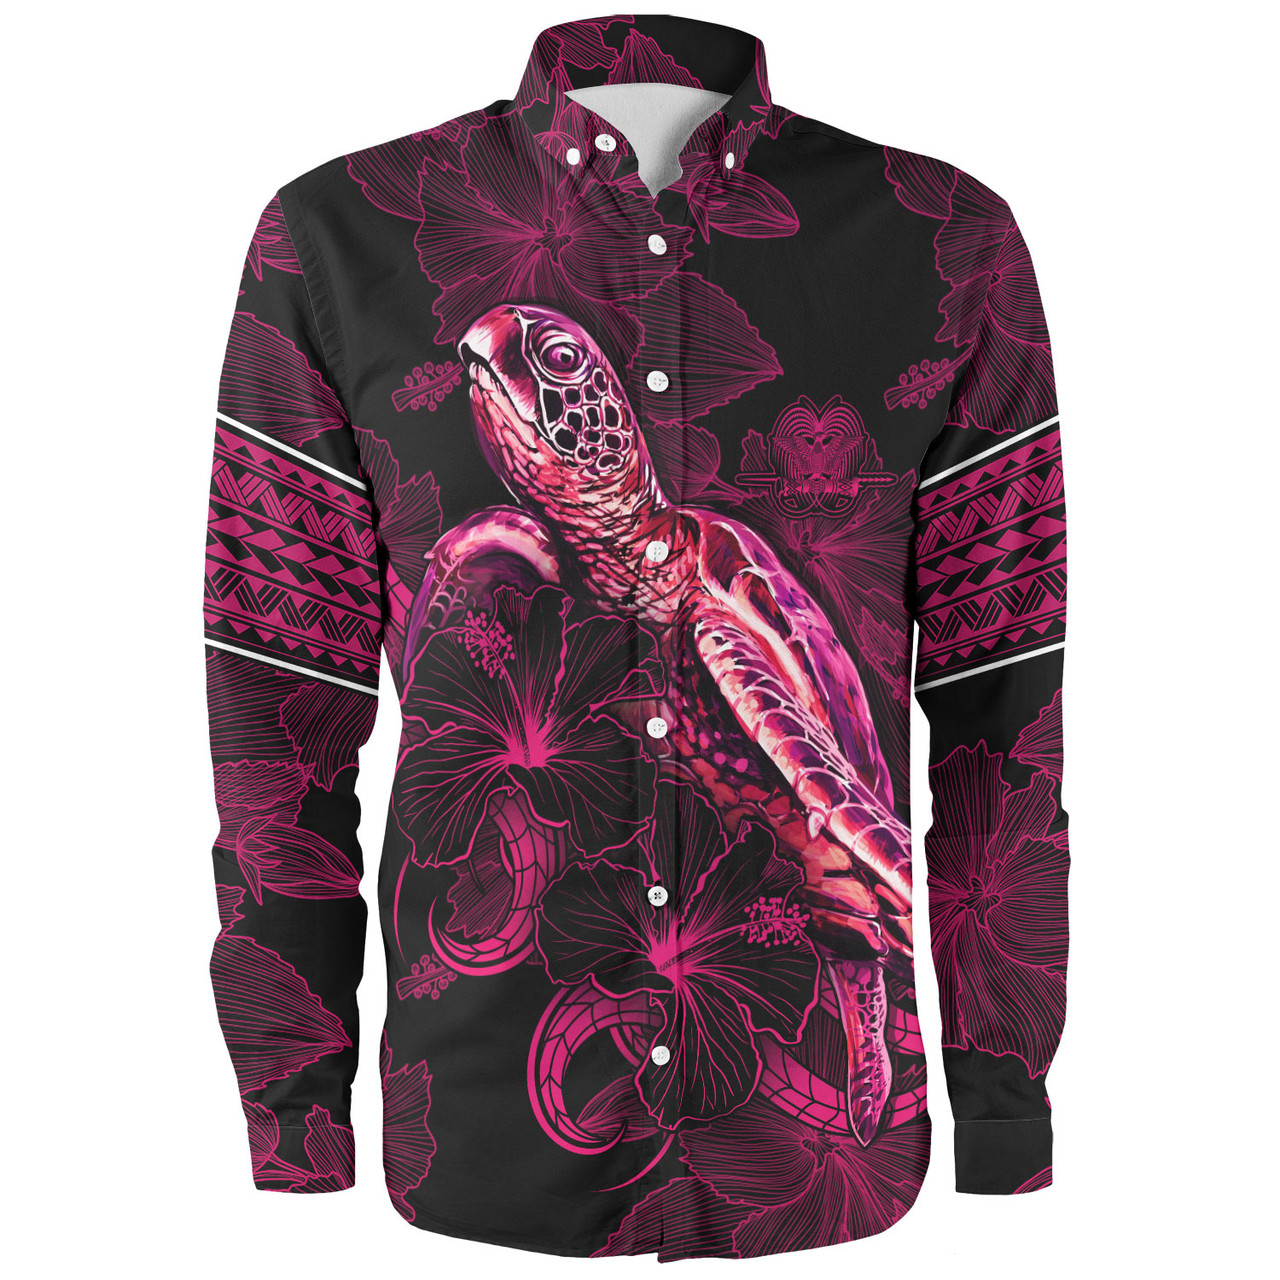 Papua New Guinea Long Sleeve Shirt Sea Turtle With Blooming Hibiscus Flowers Tribal Maroon